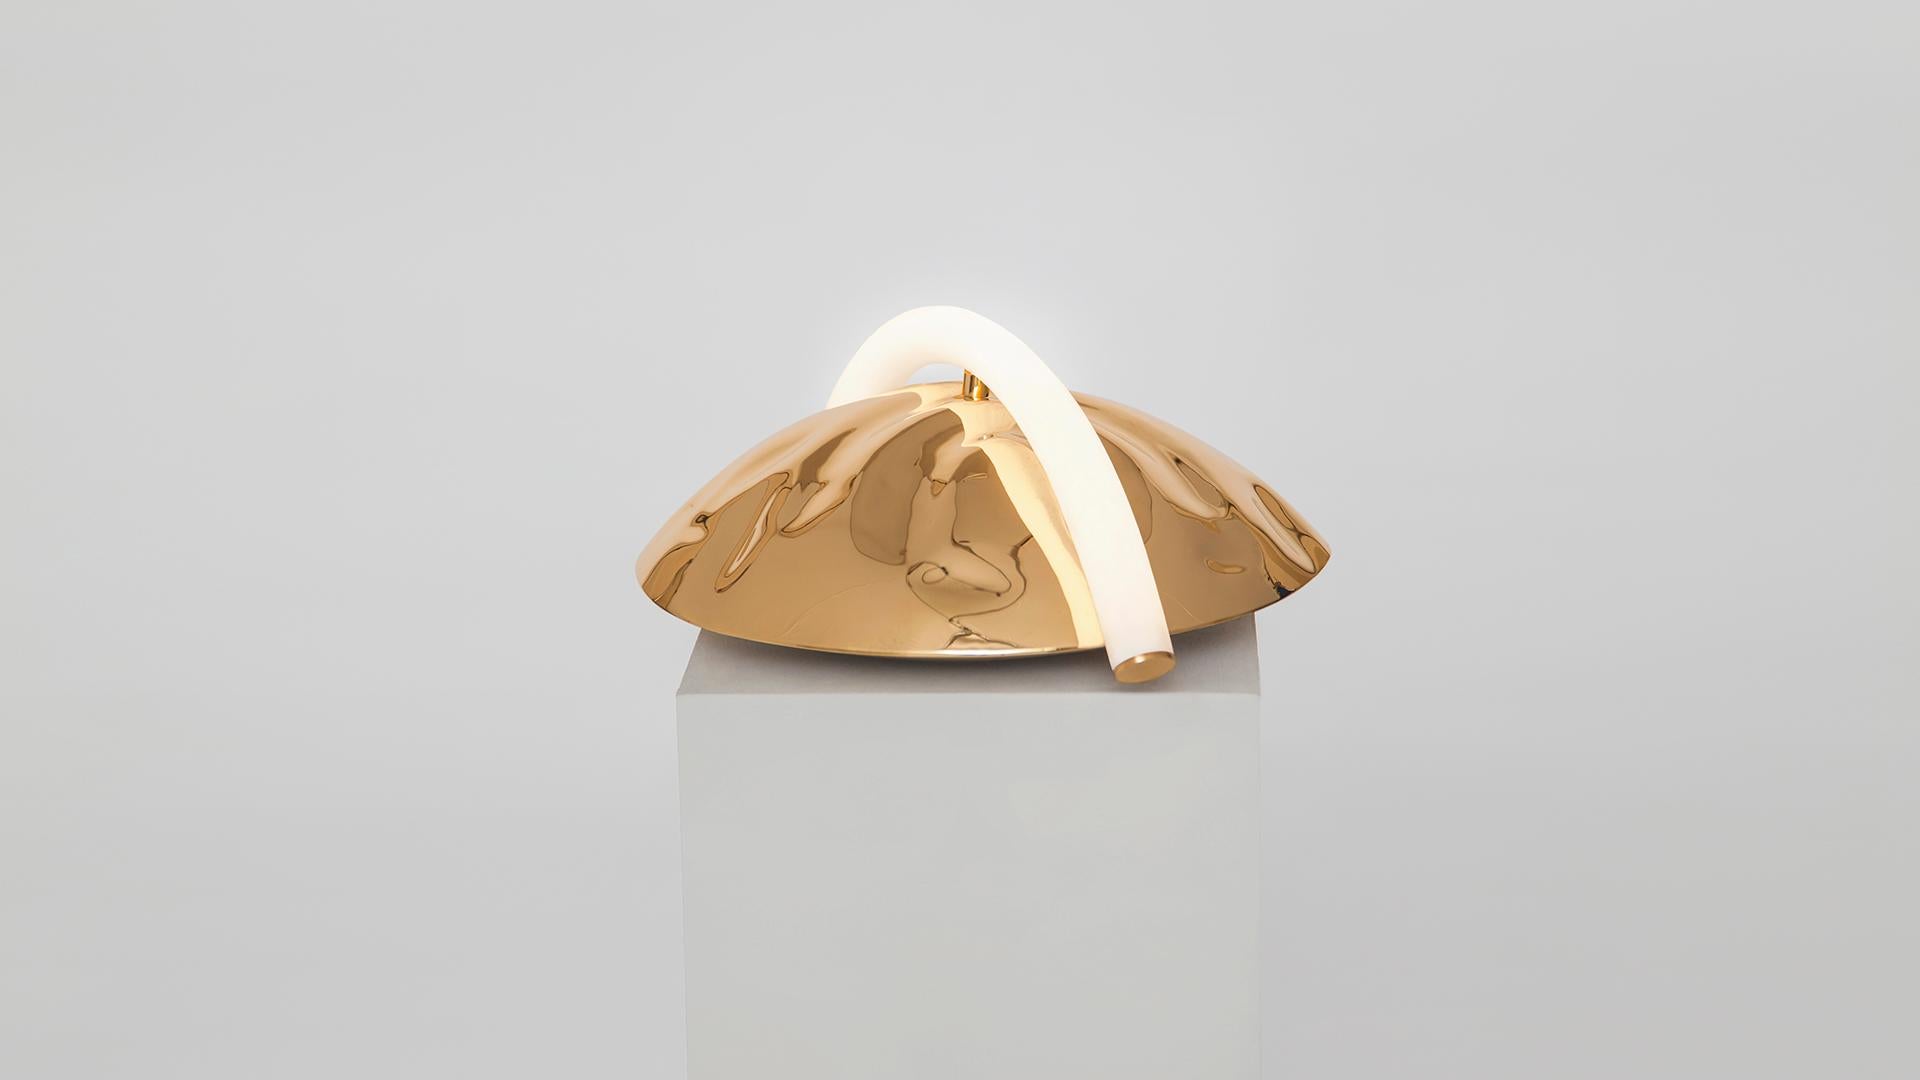 Underlay II, sculpted table lamp by Paul Matter
Underlay II
Polished cast brass with Murano glass
Dimensions: H 7